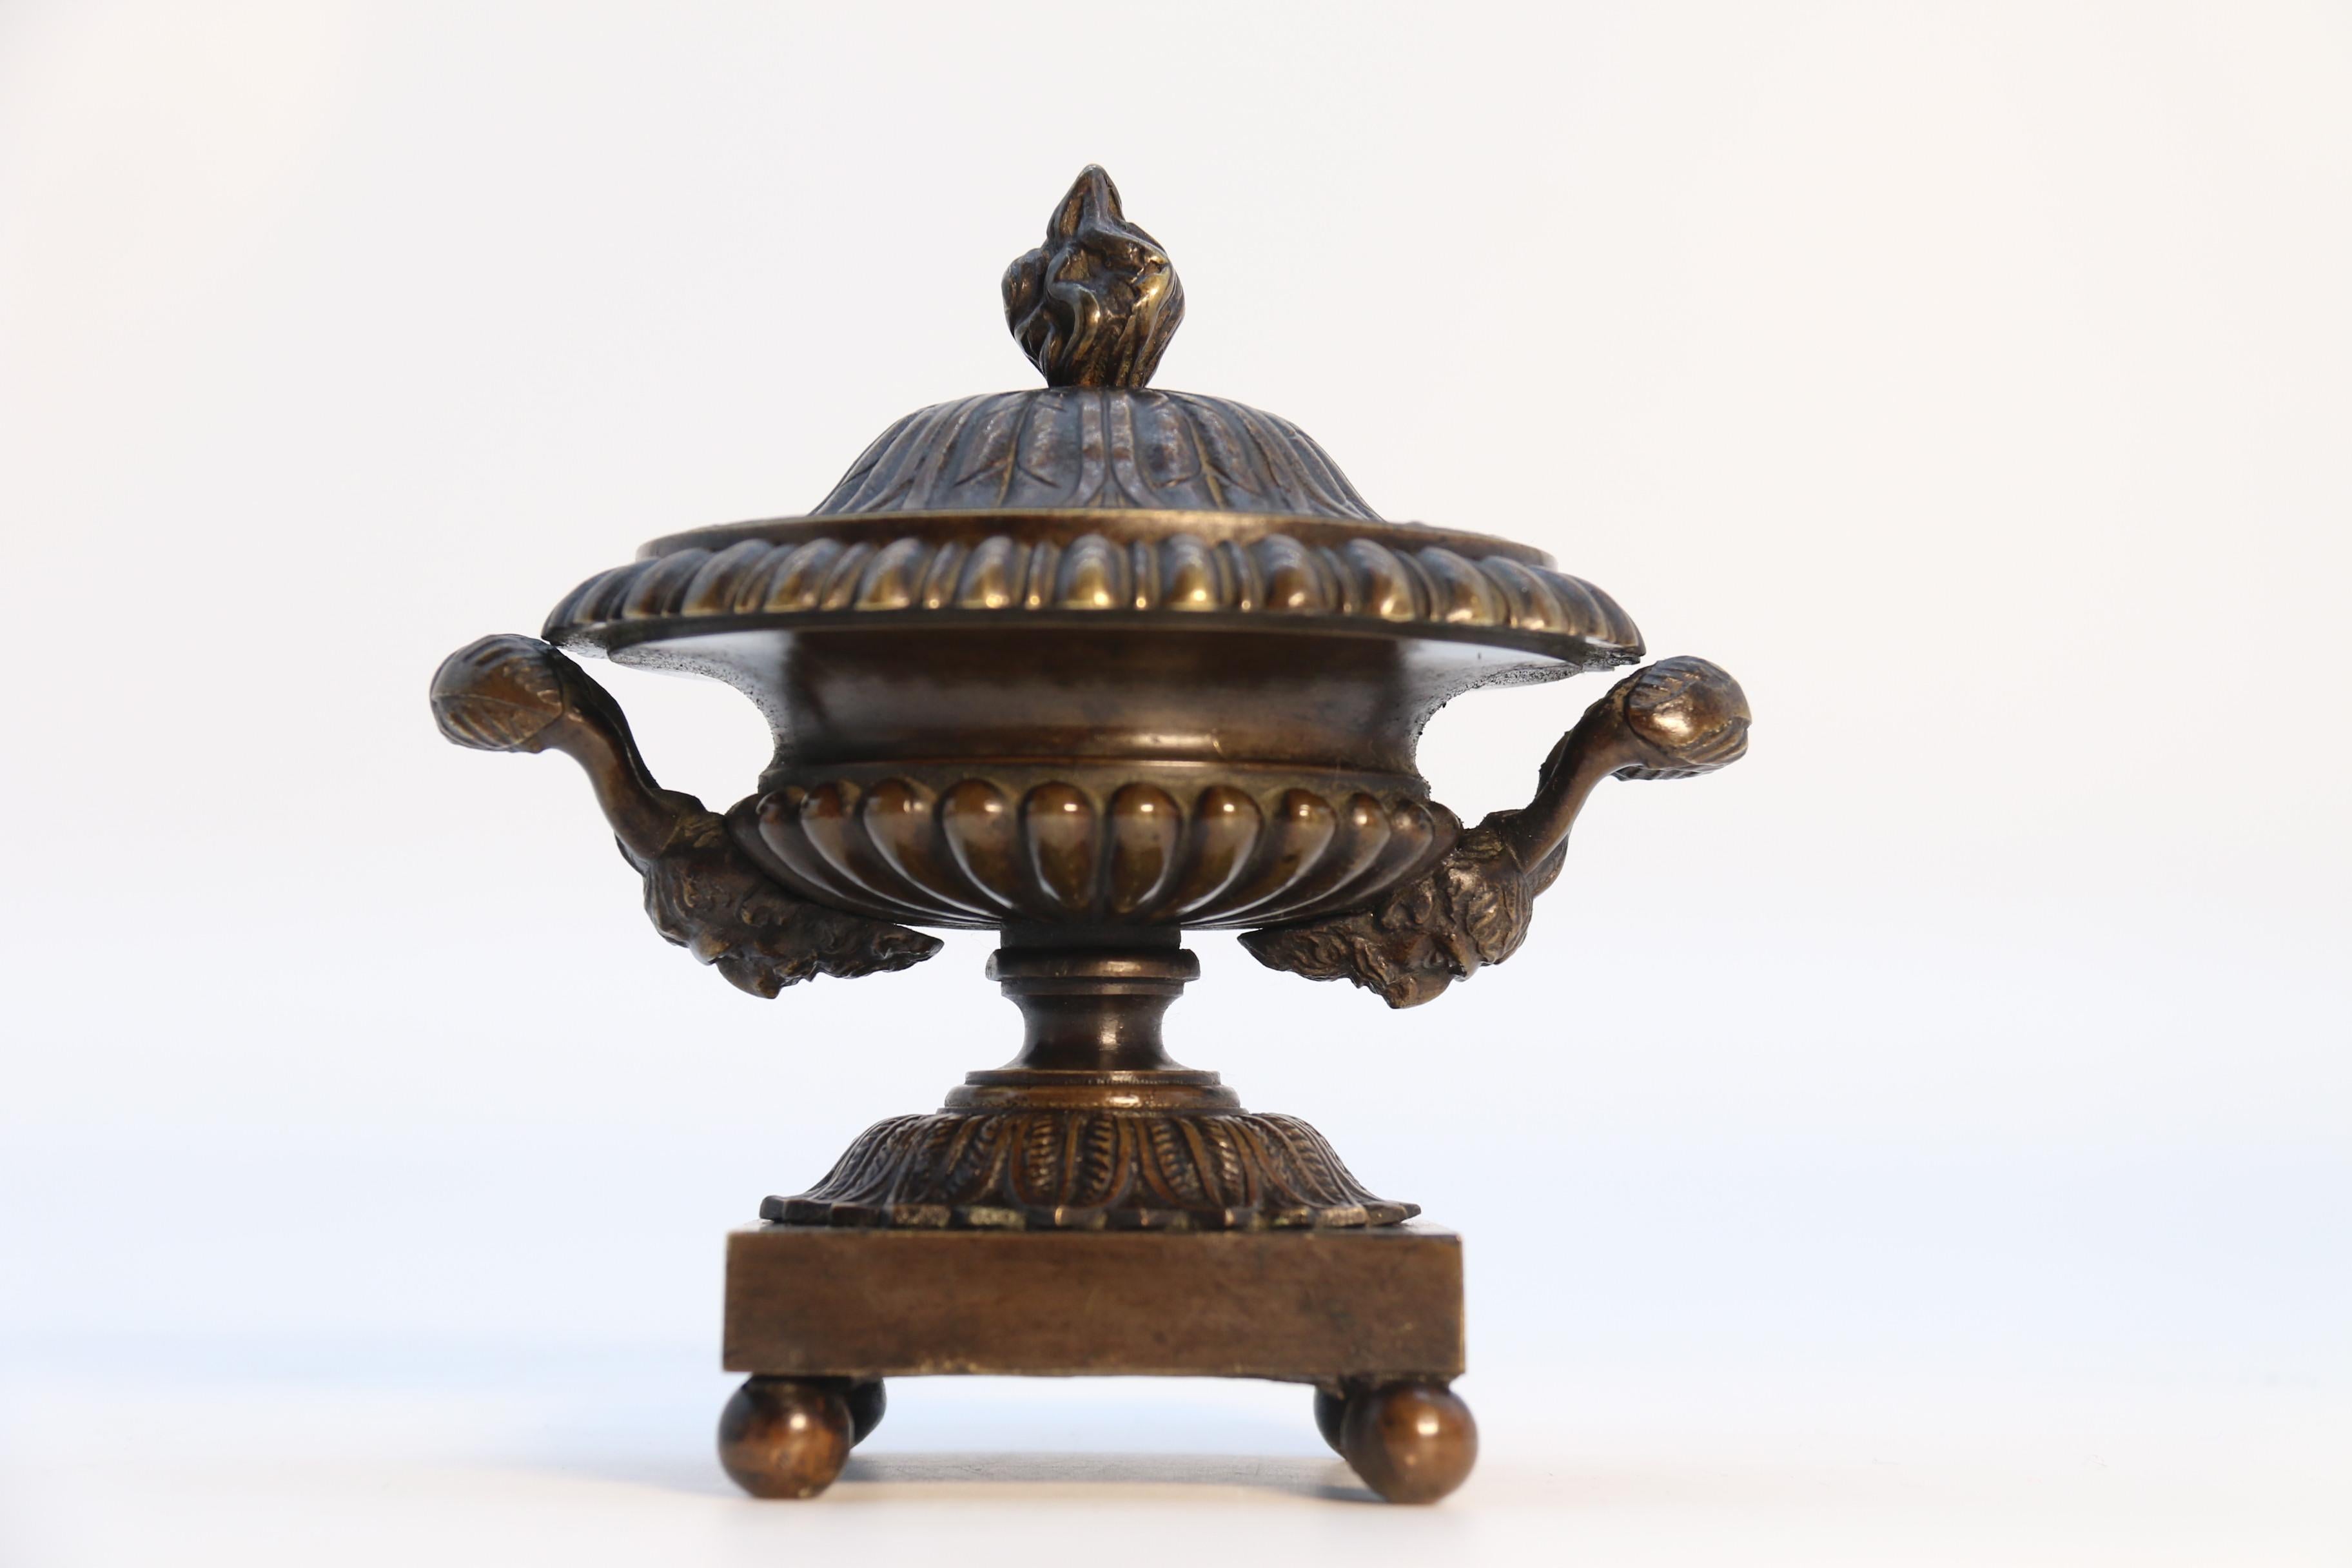 Antique  pair of English Regency period classical bronze urns,  circa 1820 For Sale 6